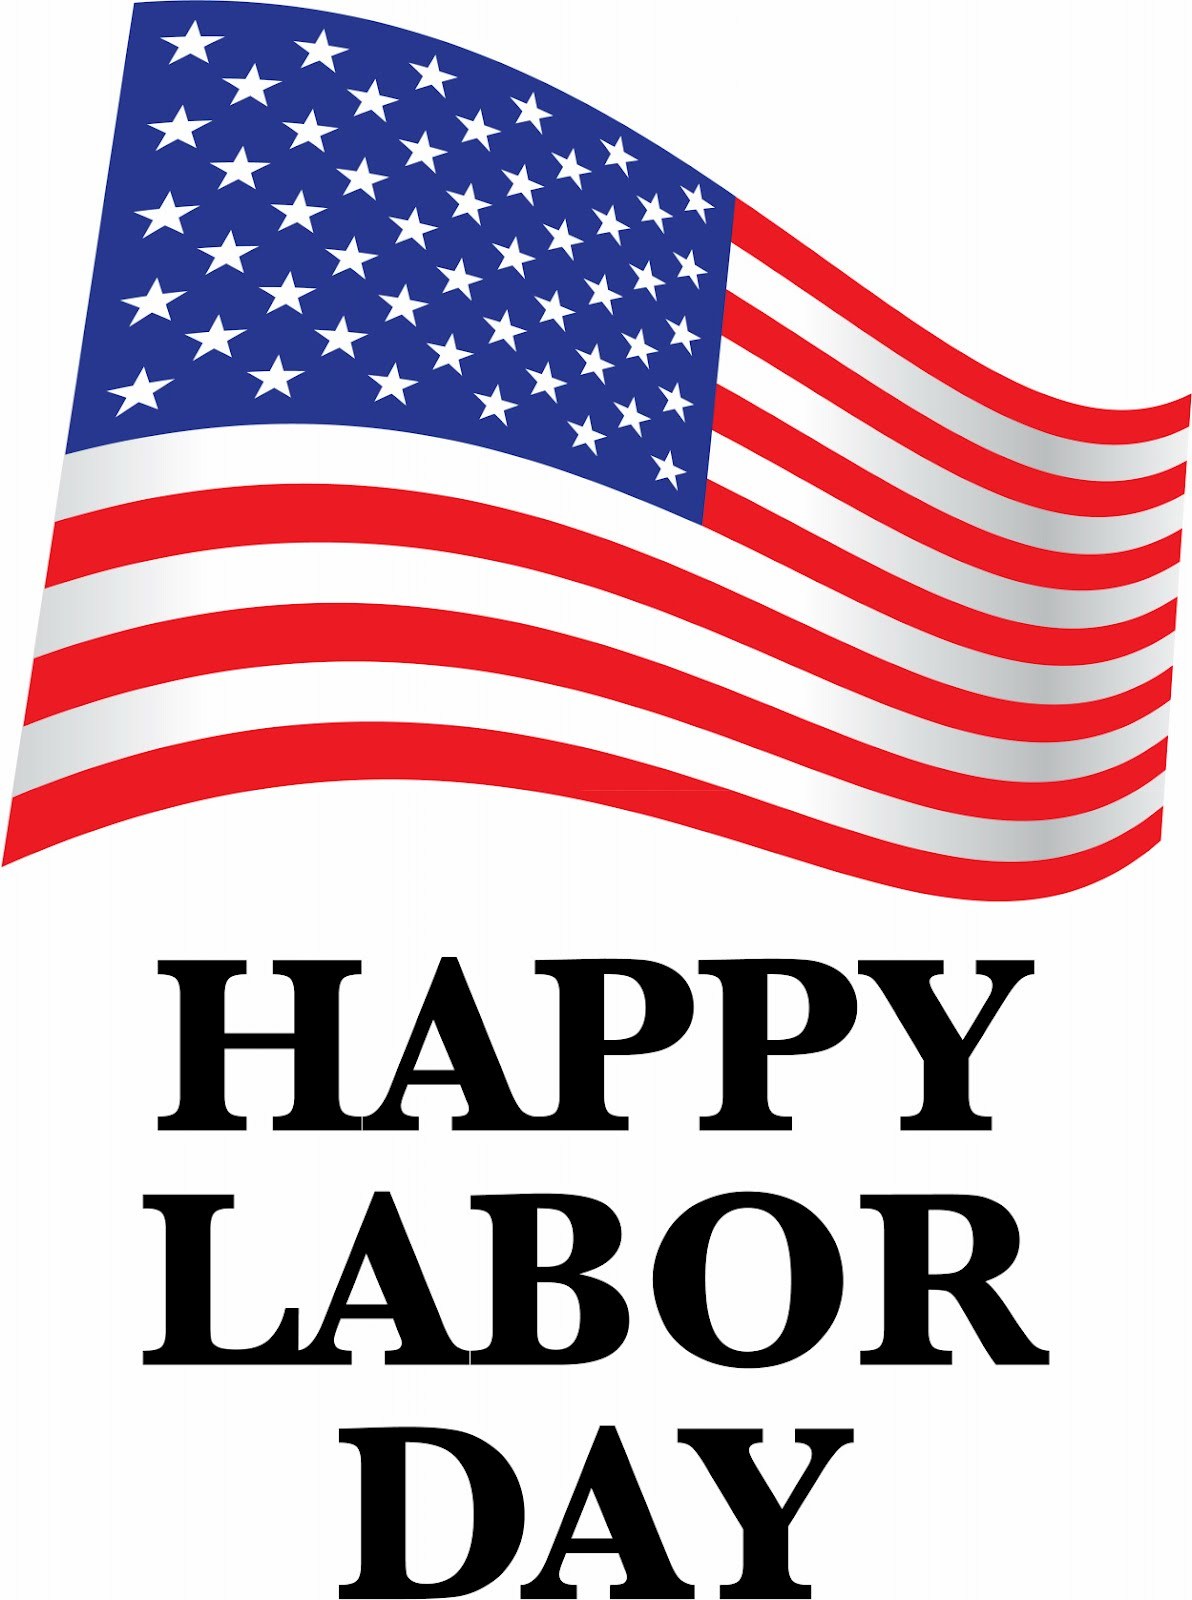 free clipart images labor day - photo #14